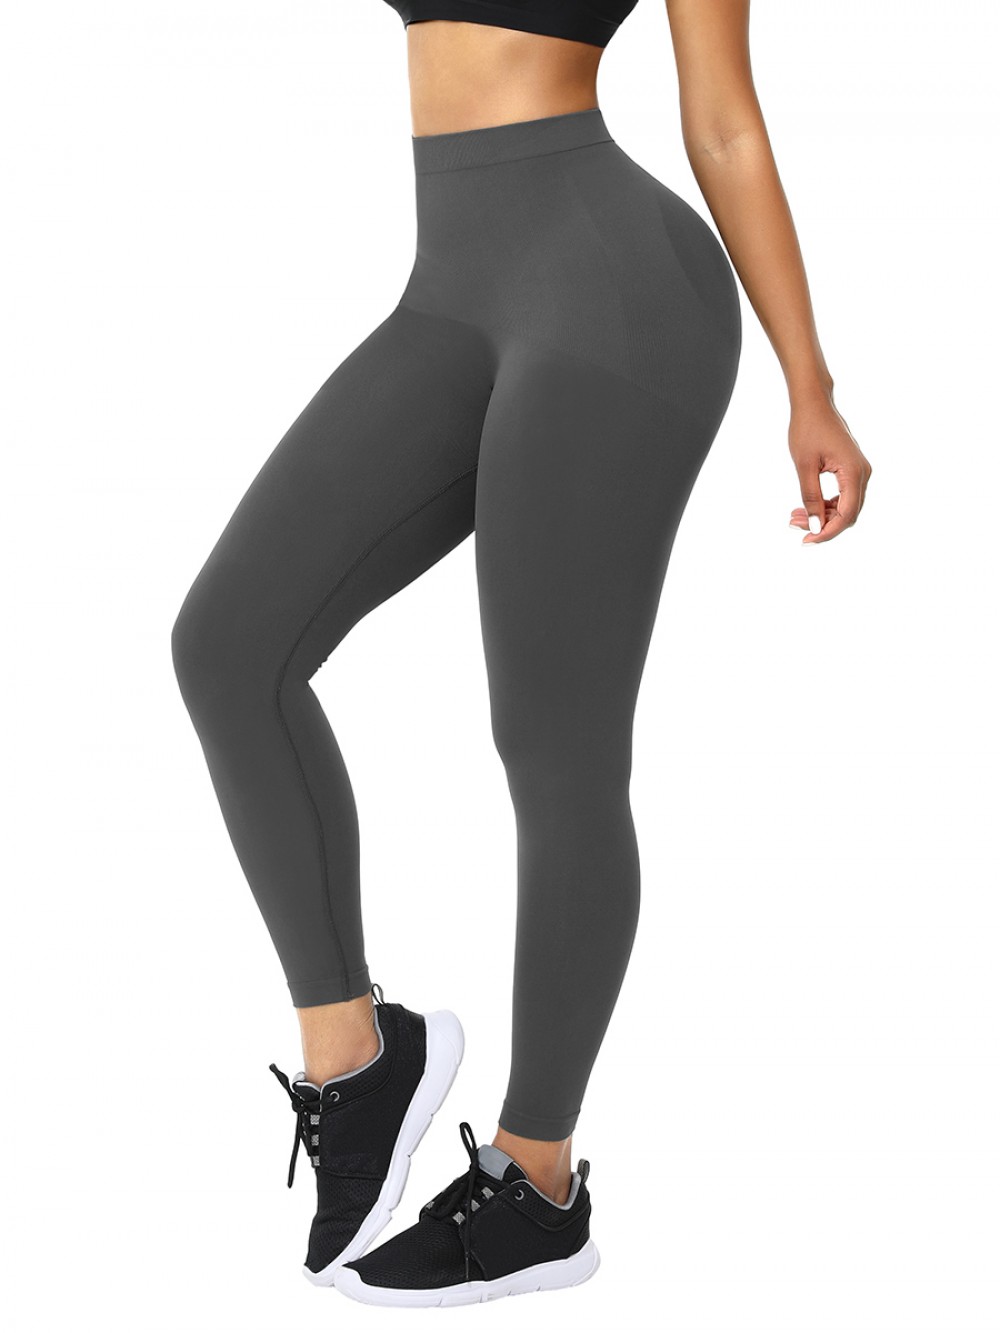 Gray Ankle Length Seamless High Waisted Control Pants Lose Weight